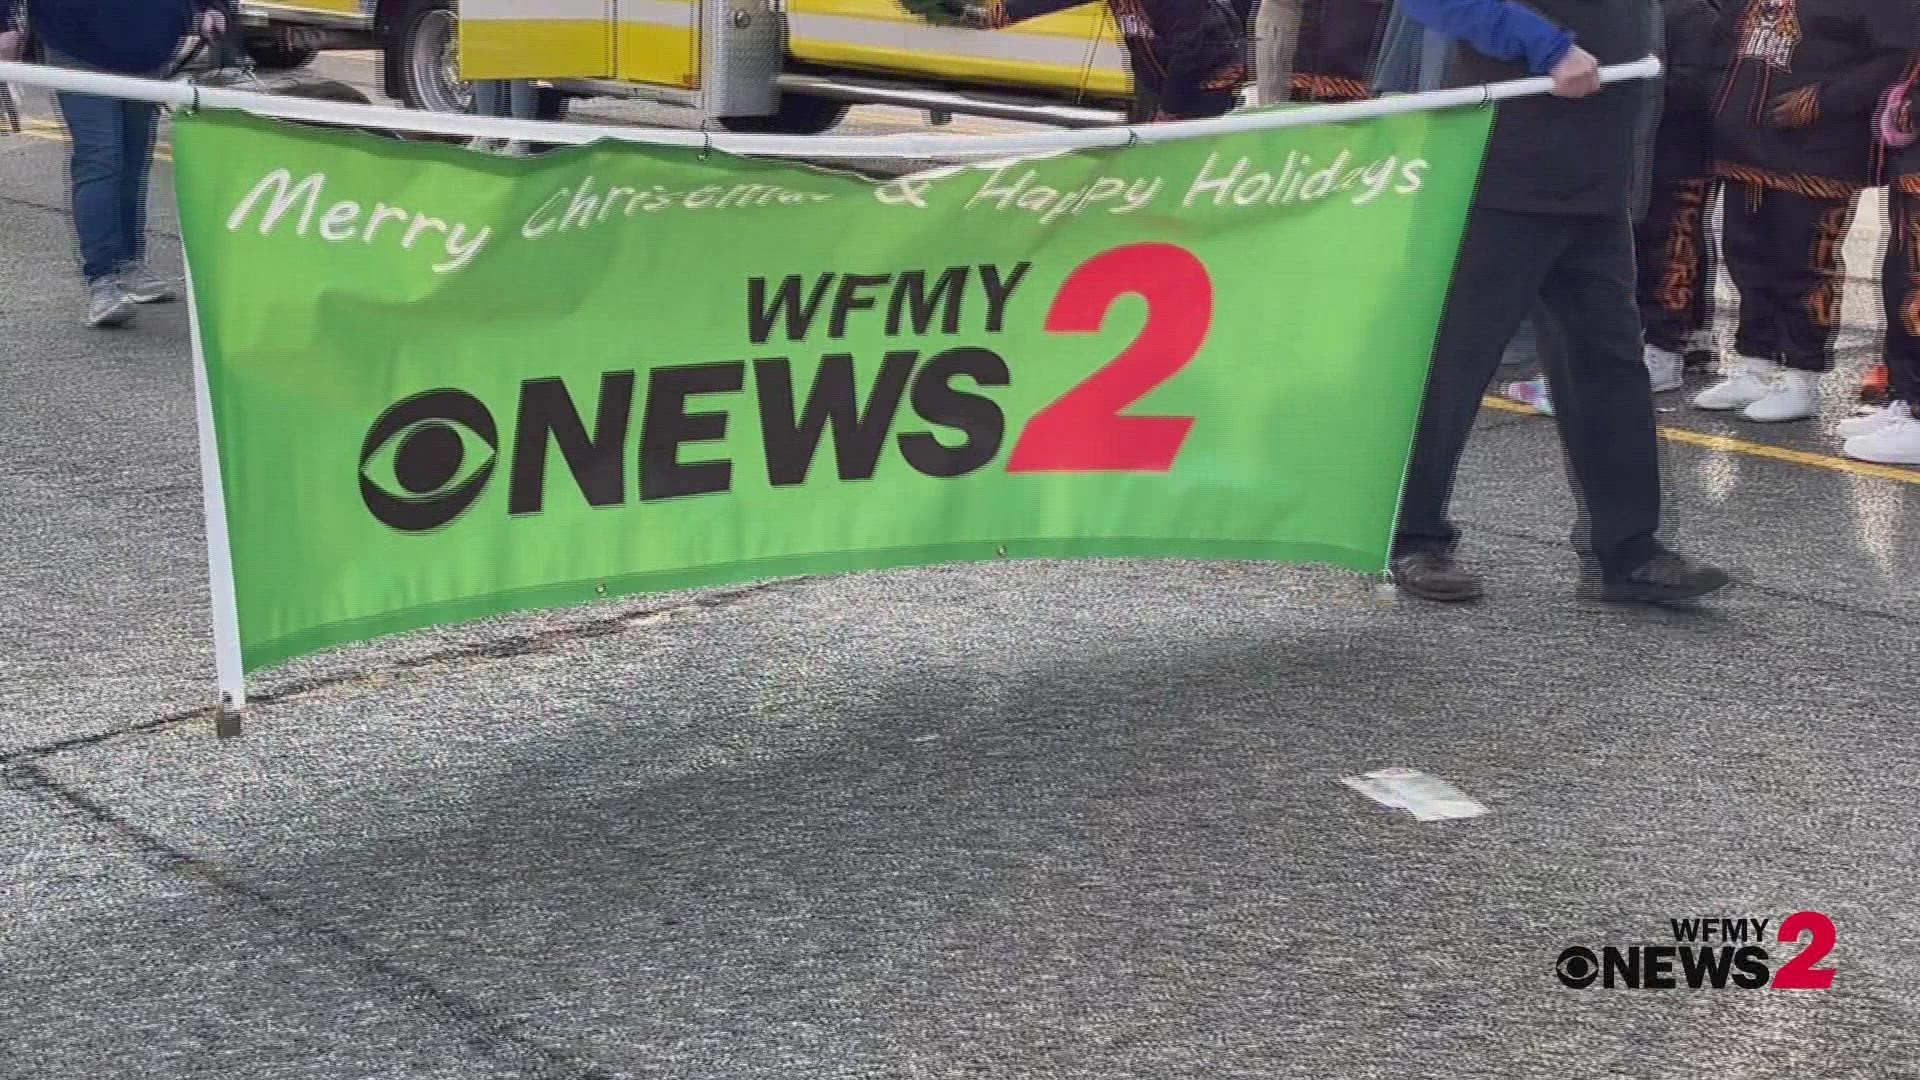 WFMY News 2 had a blast at the High Point Holiday Parade! We got to connect with our community and hand out reindeer antler headbands!